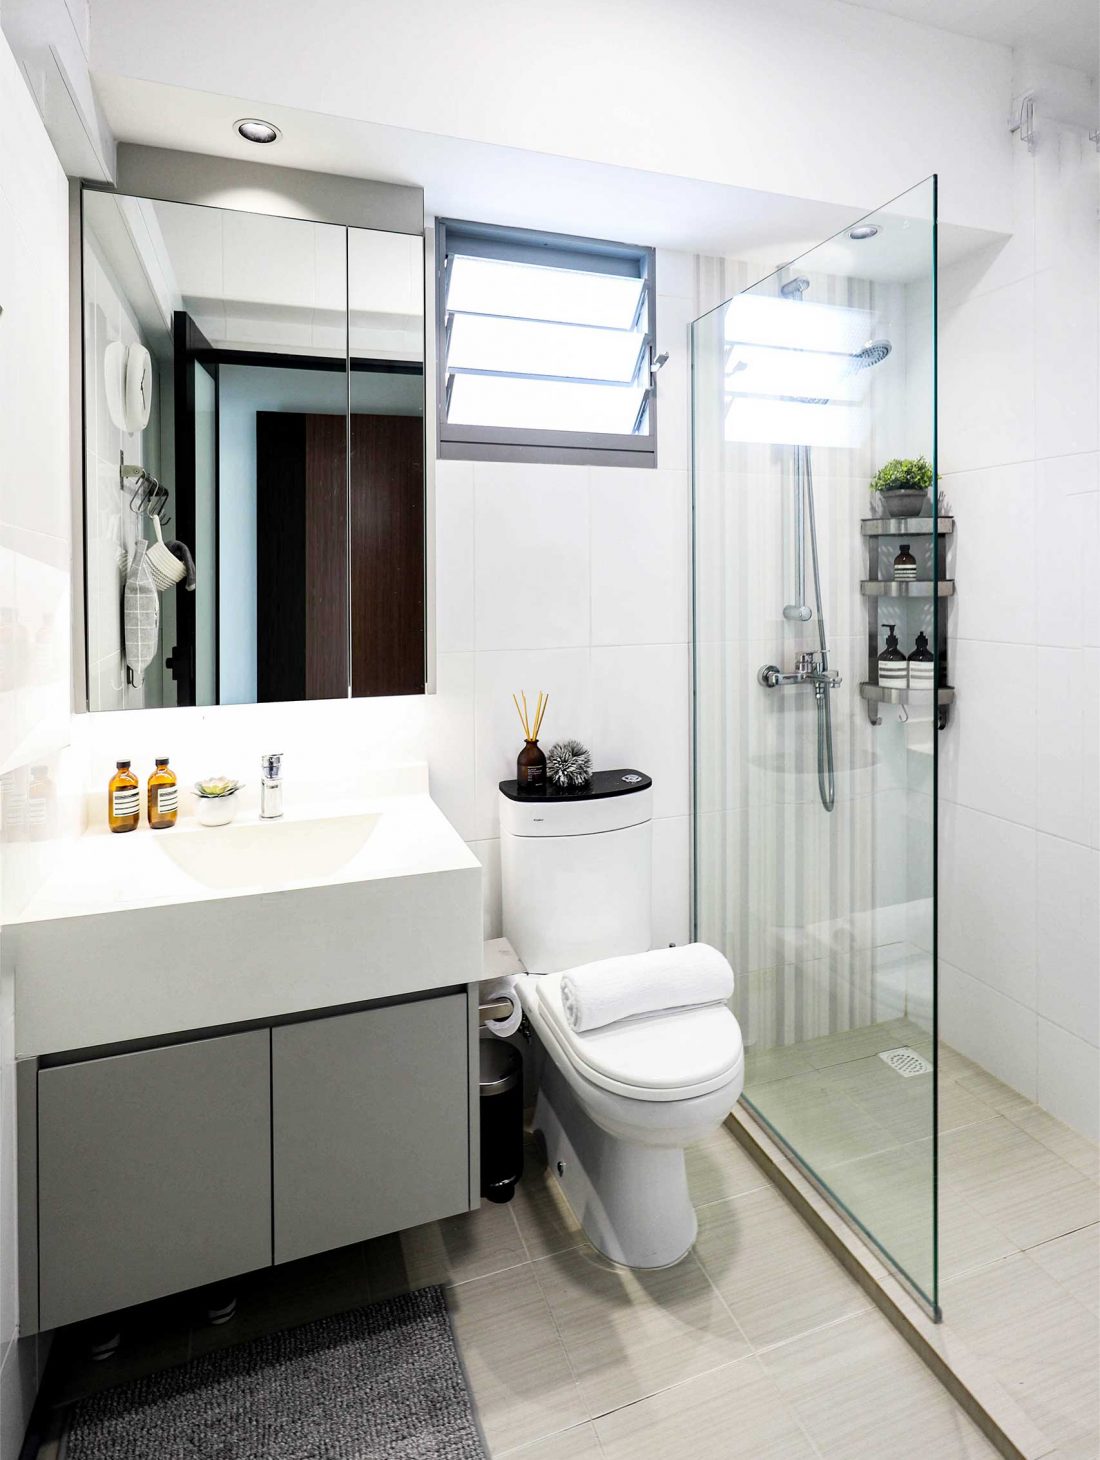 HDB toilet renovation and interior design for wet and dry space